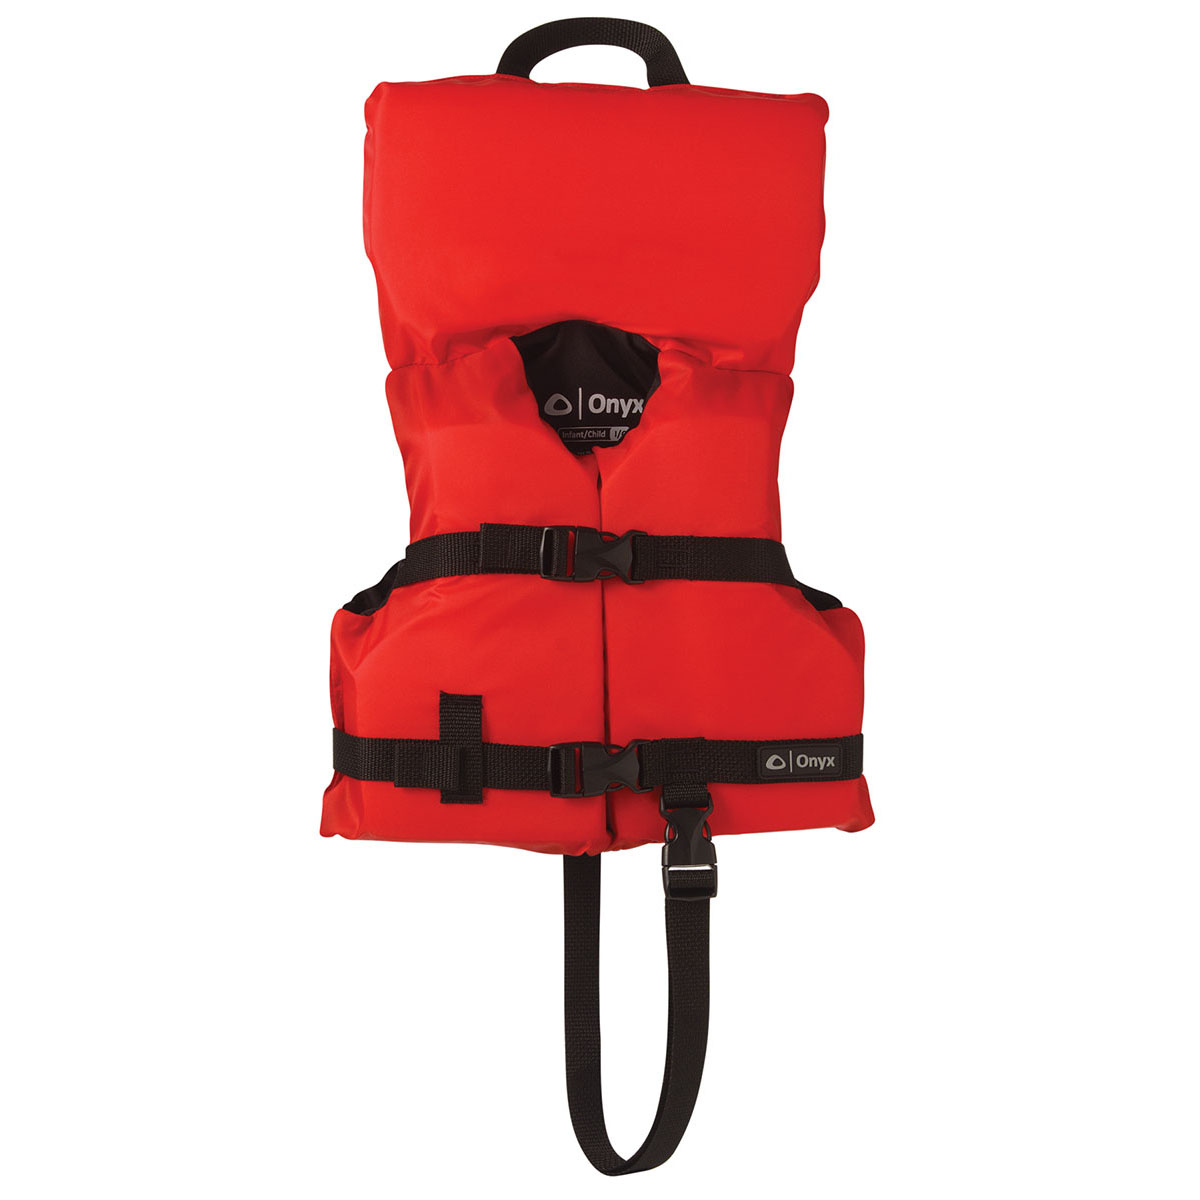 Onyx General Purpose Universal Life Jacket RED USCG Approved CHOOSE SIZE 